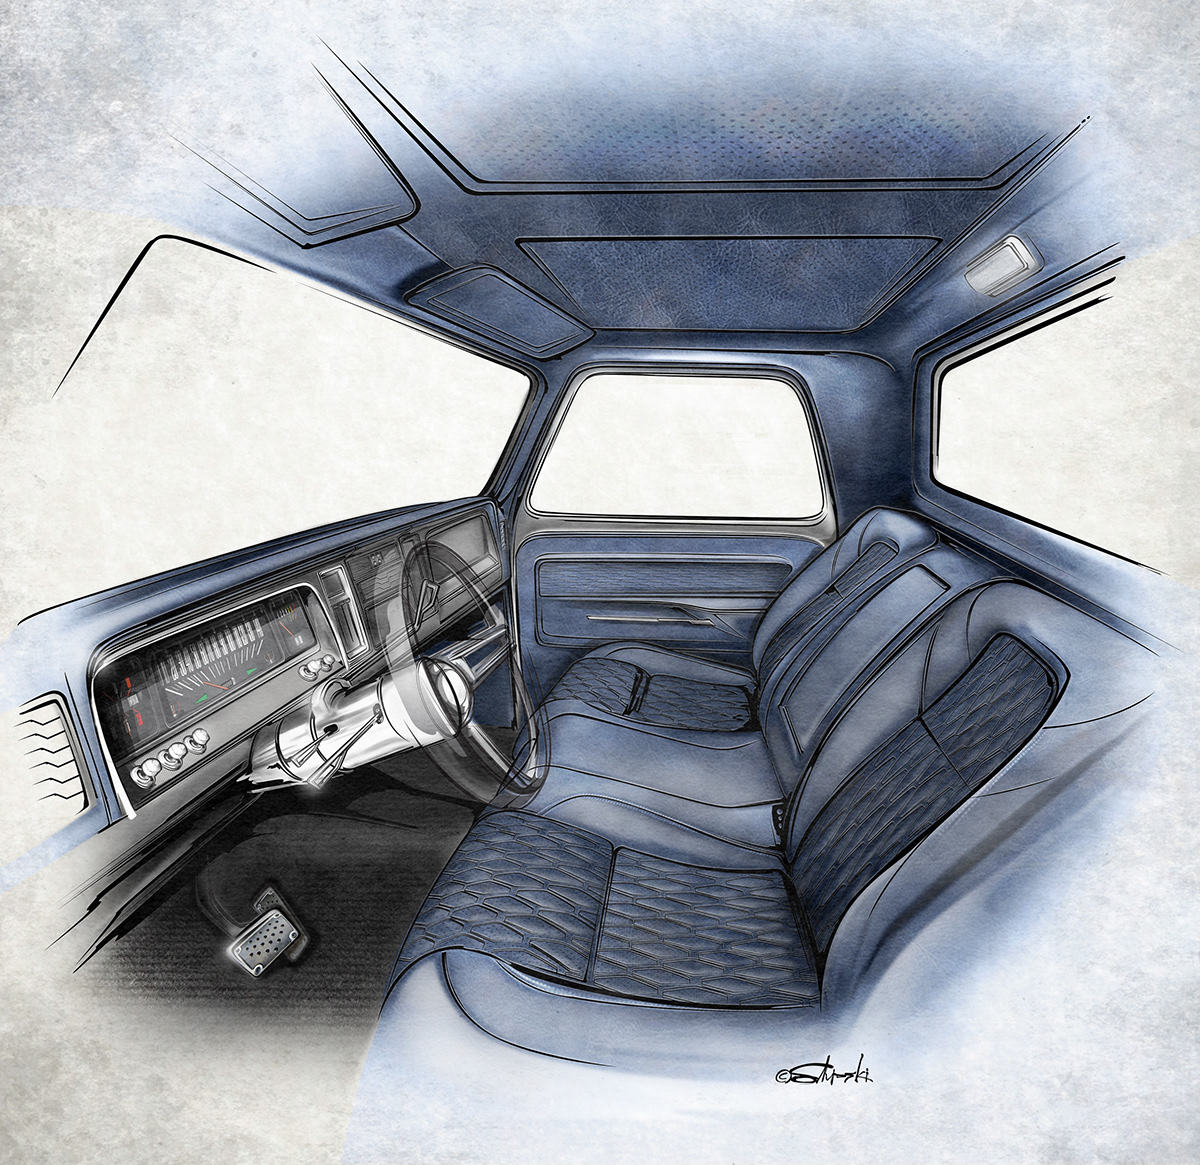 Custom interior design for a Chevy C-10 pickup truck project created in Illustrator and Photoshop